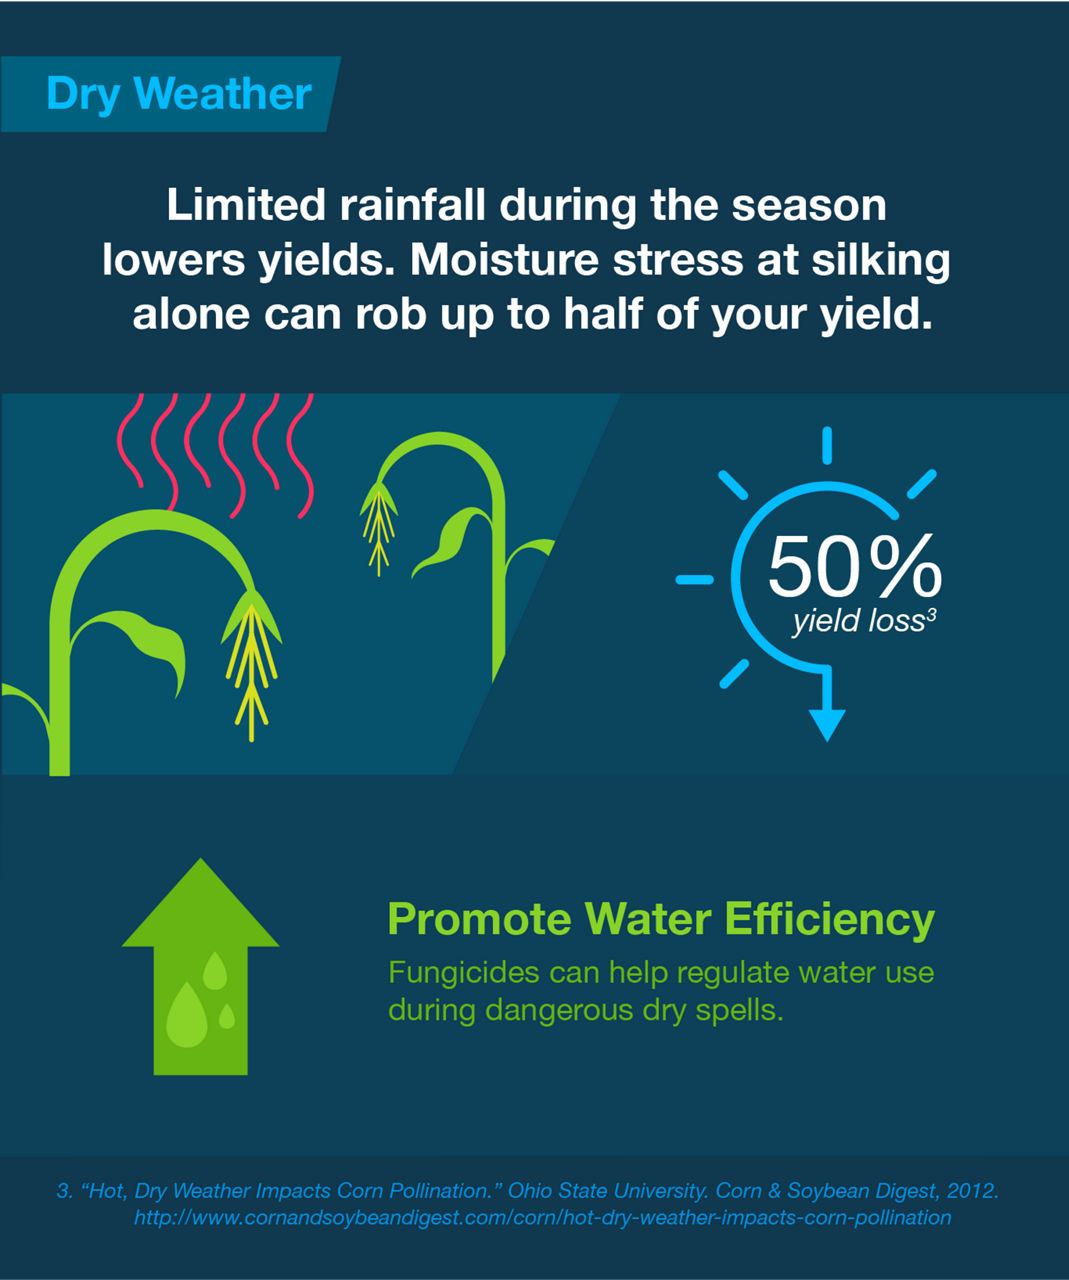 limited-rainfall-during-the-season-lowers-yields-moisture-stress-at-silking-can-rob-up-to-half-your-yield